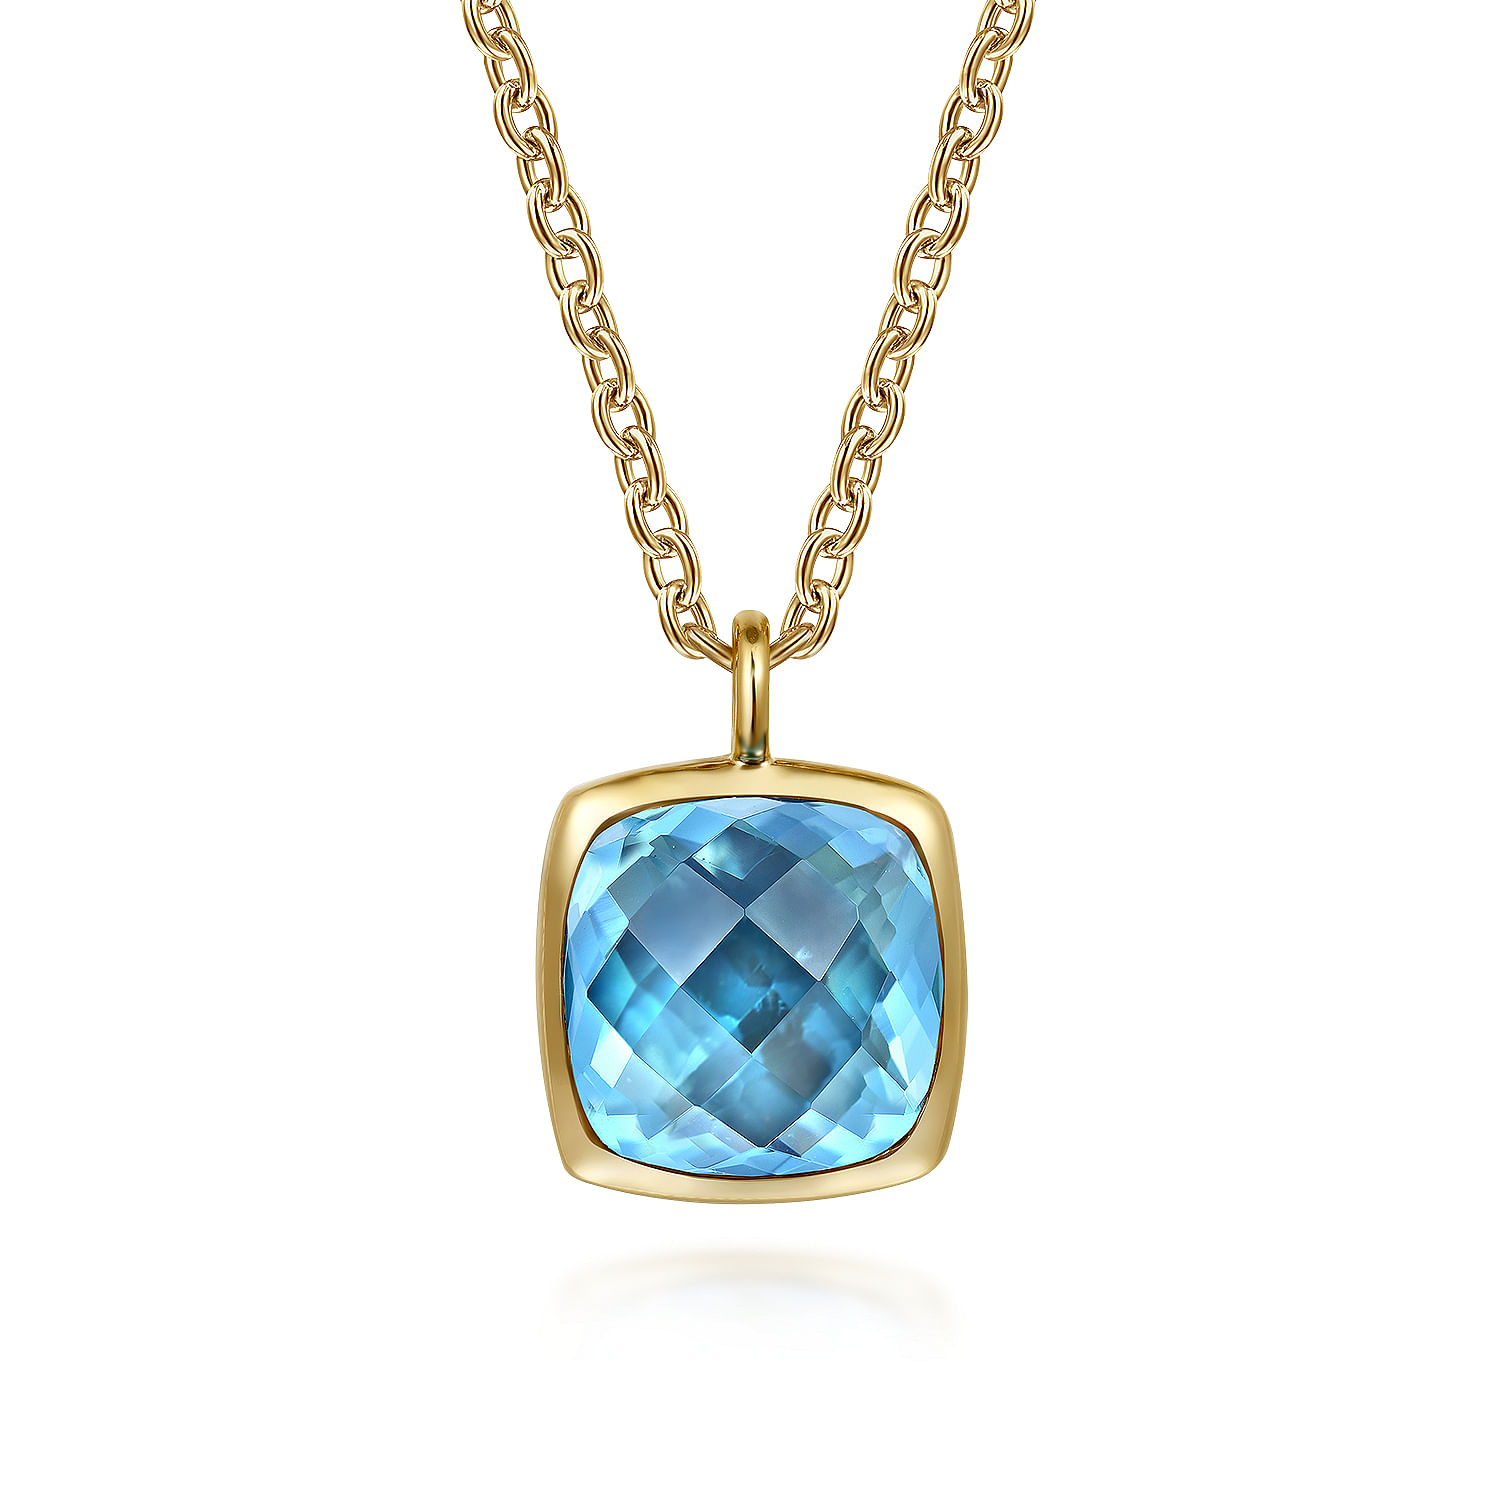 14K Yellow Gold Cushion Cut Blue Topaz Necklace With Flower Pattern J-Back and Bezel Setting